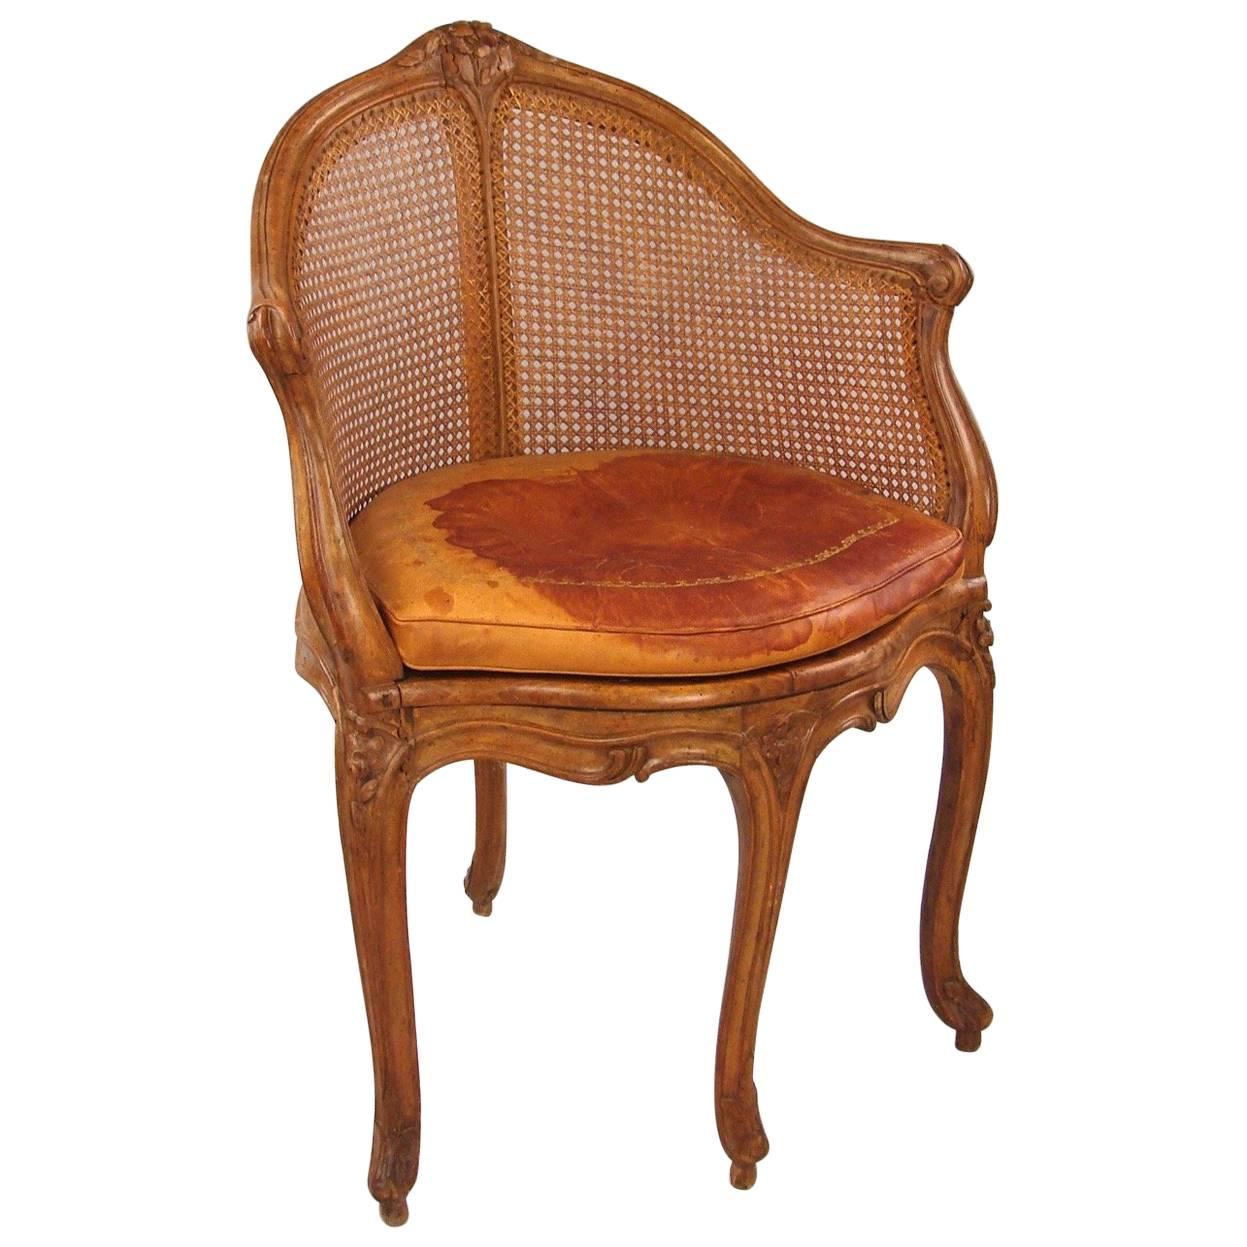 A good 18th century Louis XV period walnut caned fauteuil en bureau with a distressed leather cushion, circa 1760.